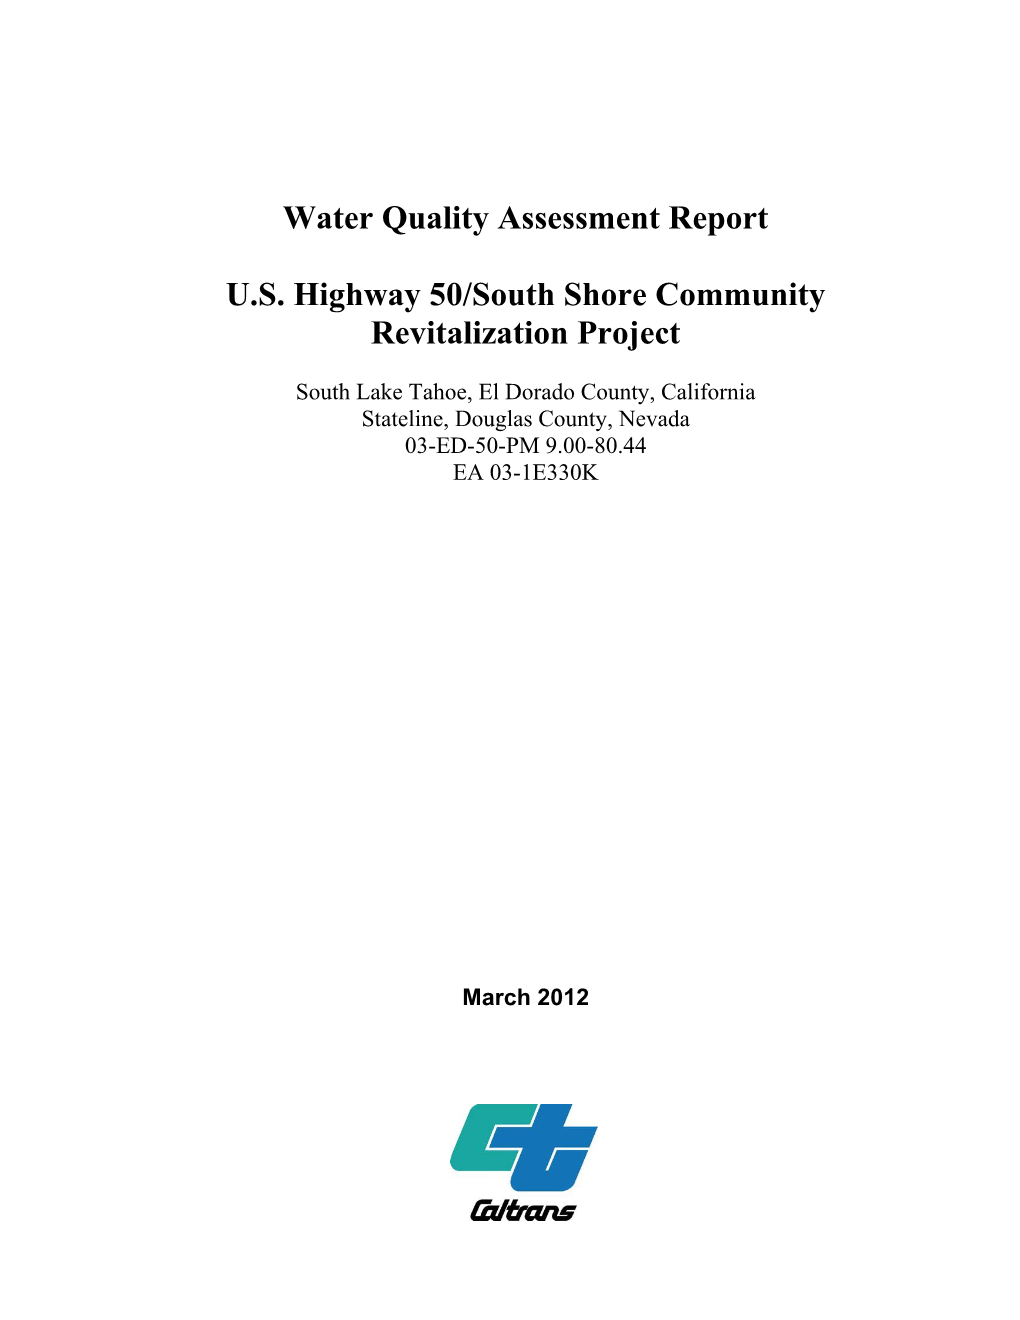 Air Quality Assessment Report